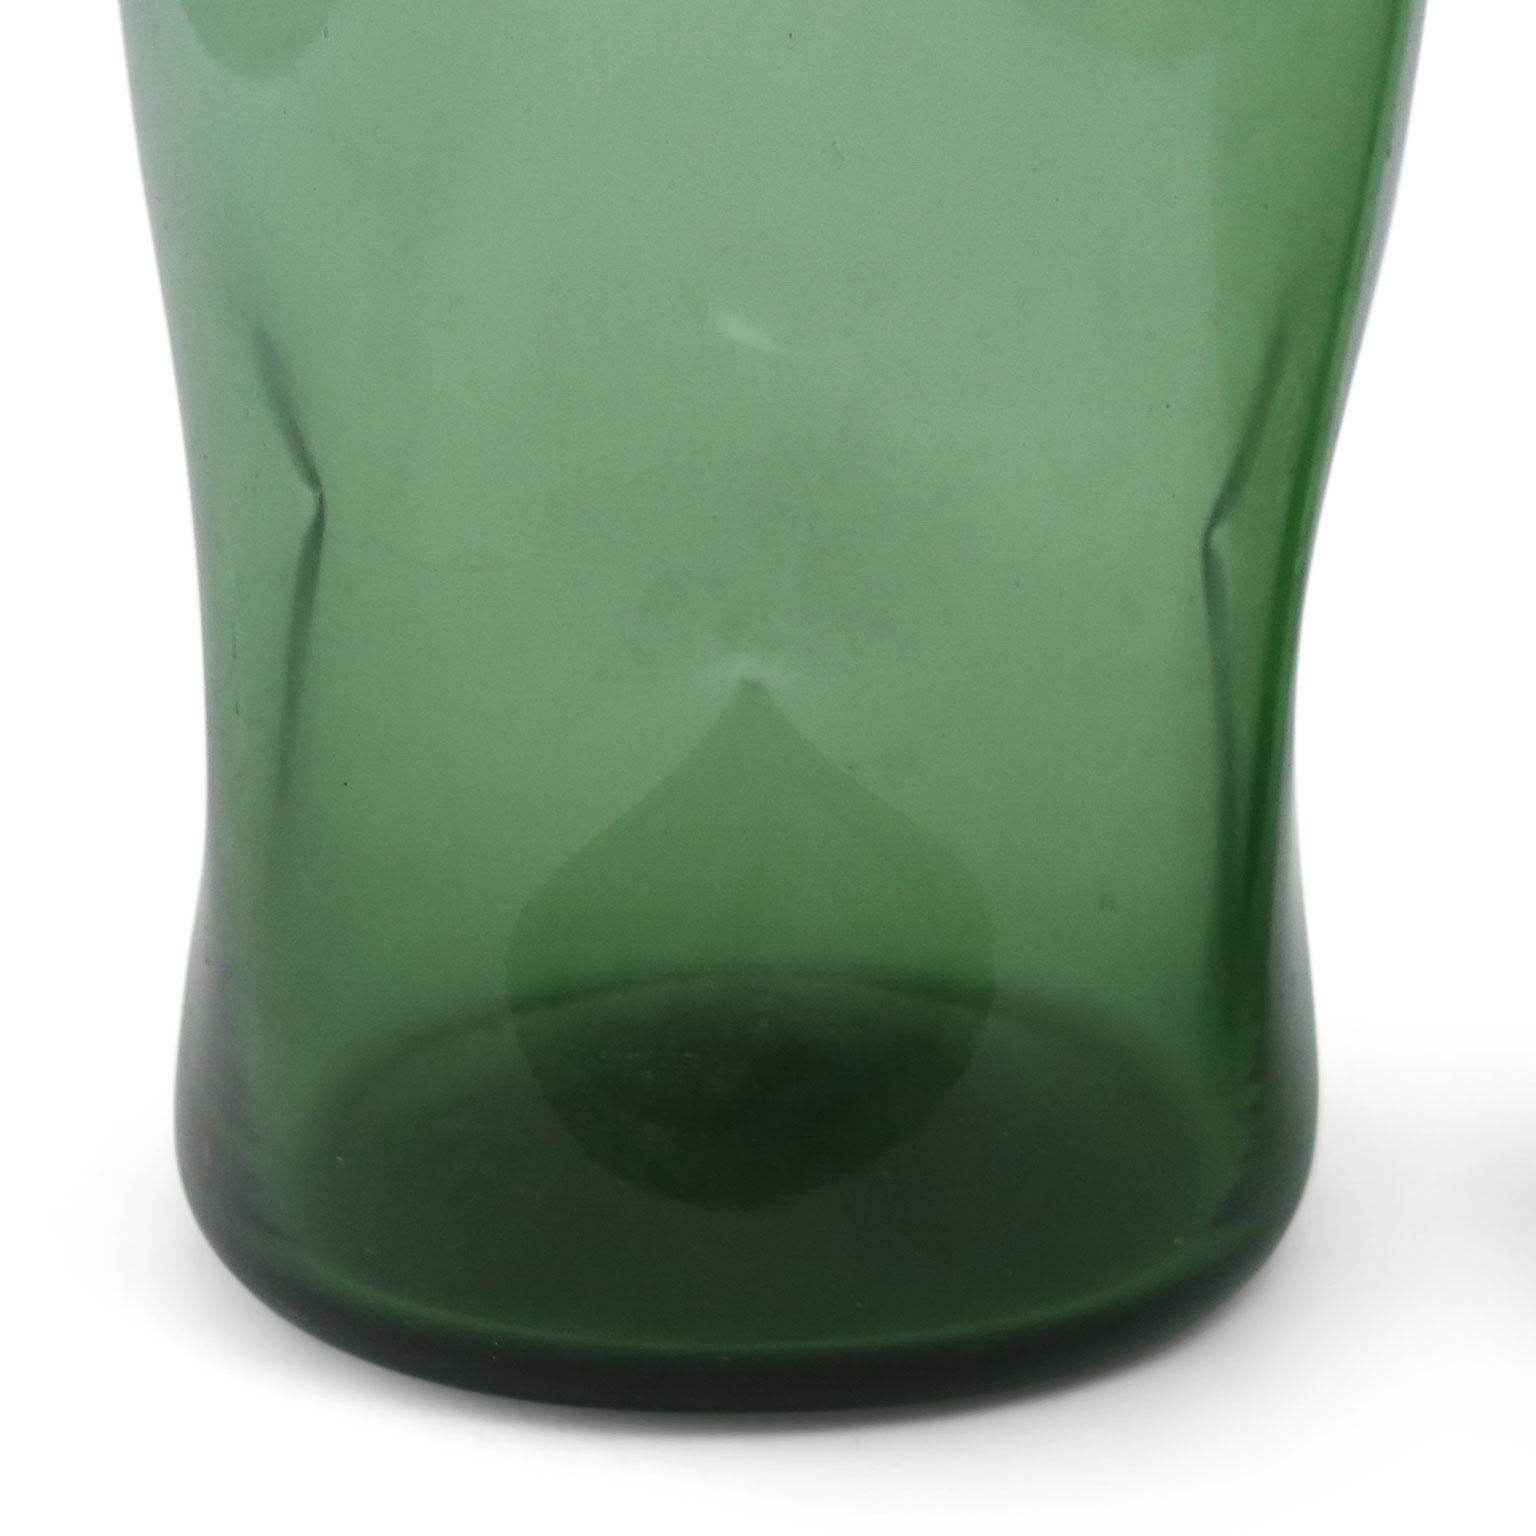 Italian green glass vase by Empoli, circa 1960. Vase’s surface is decorated in dimples.